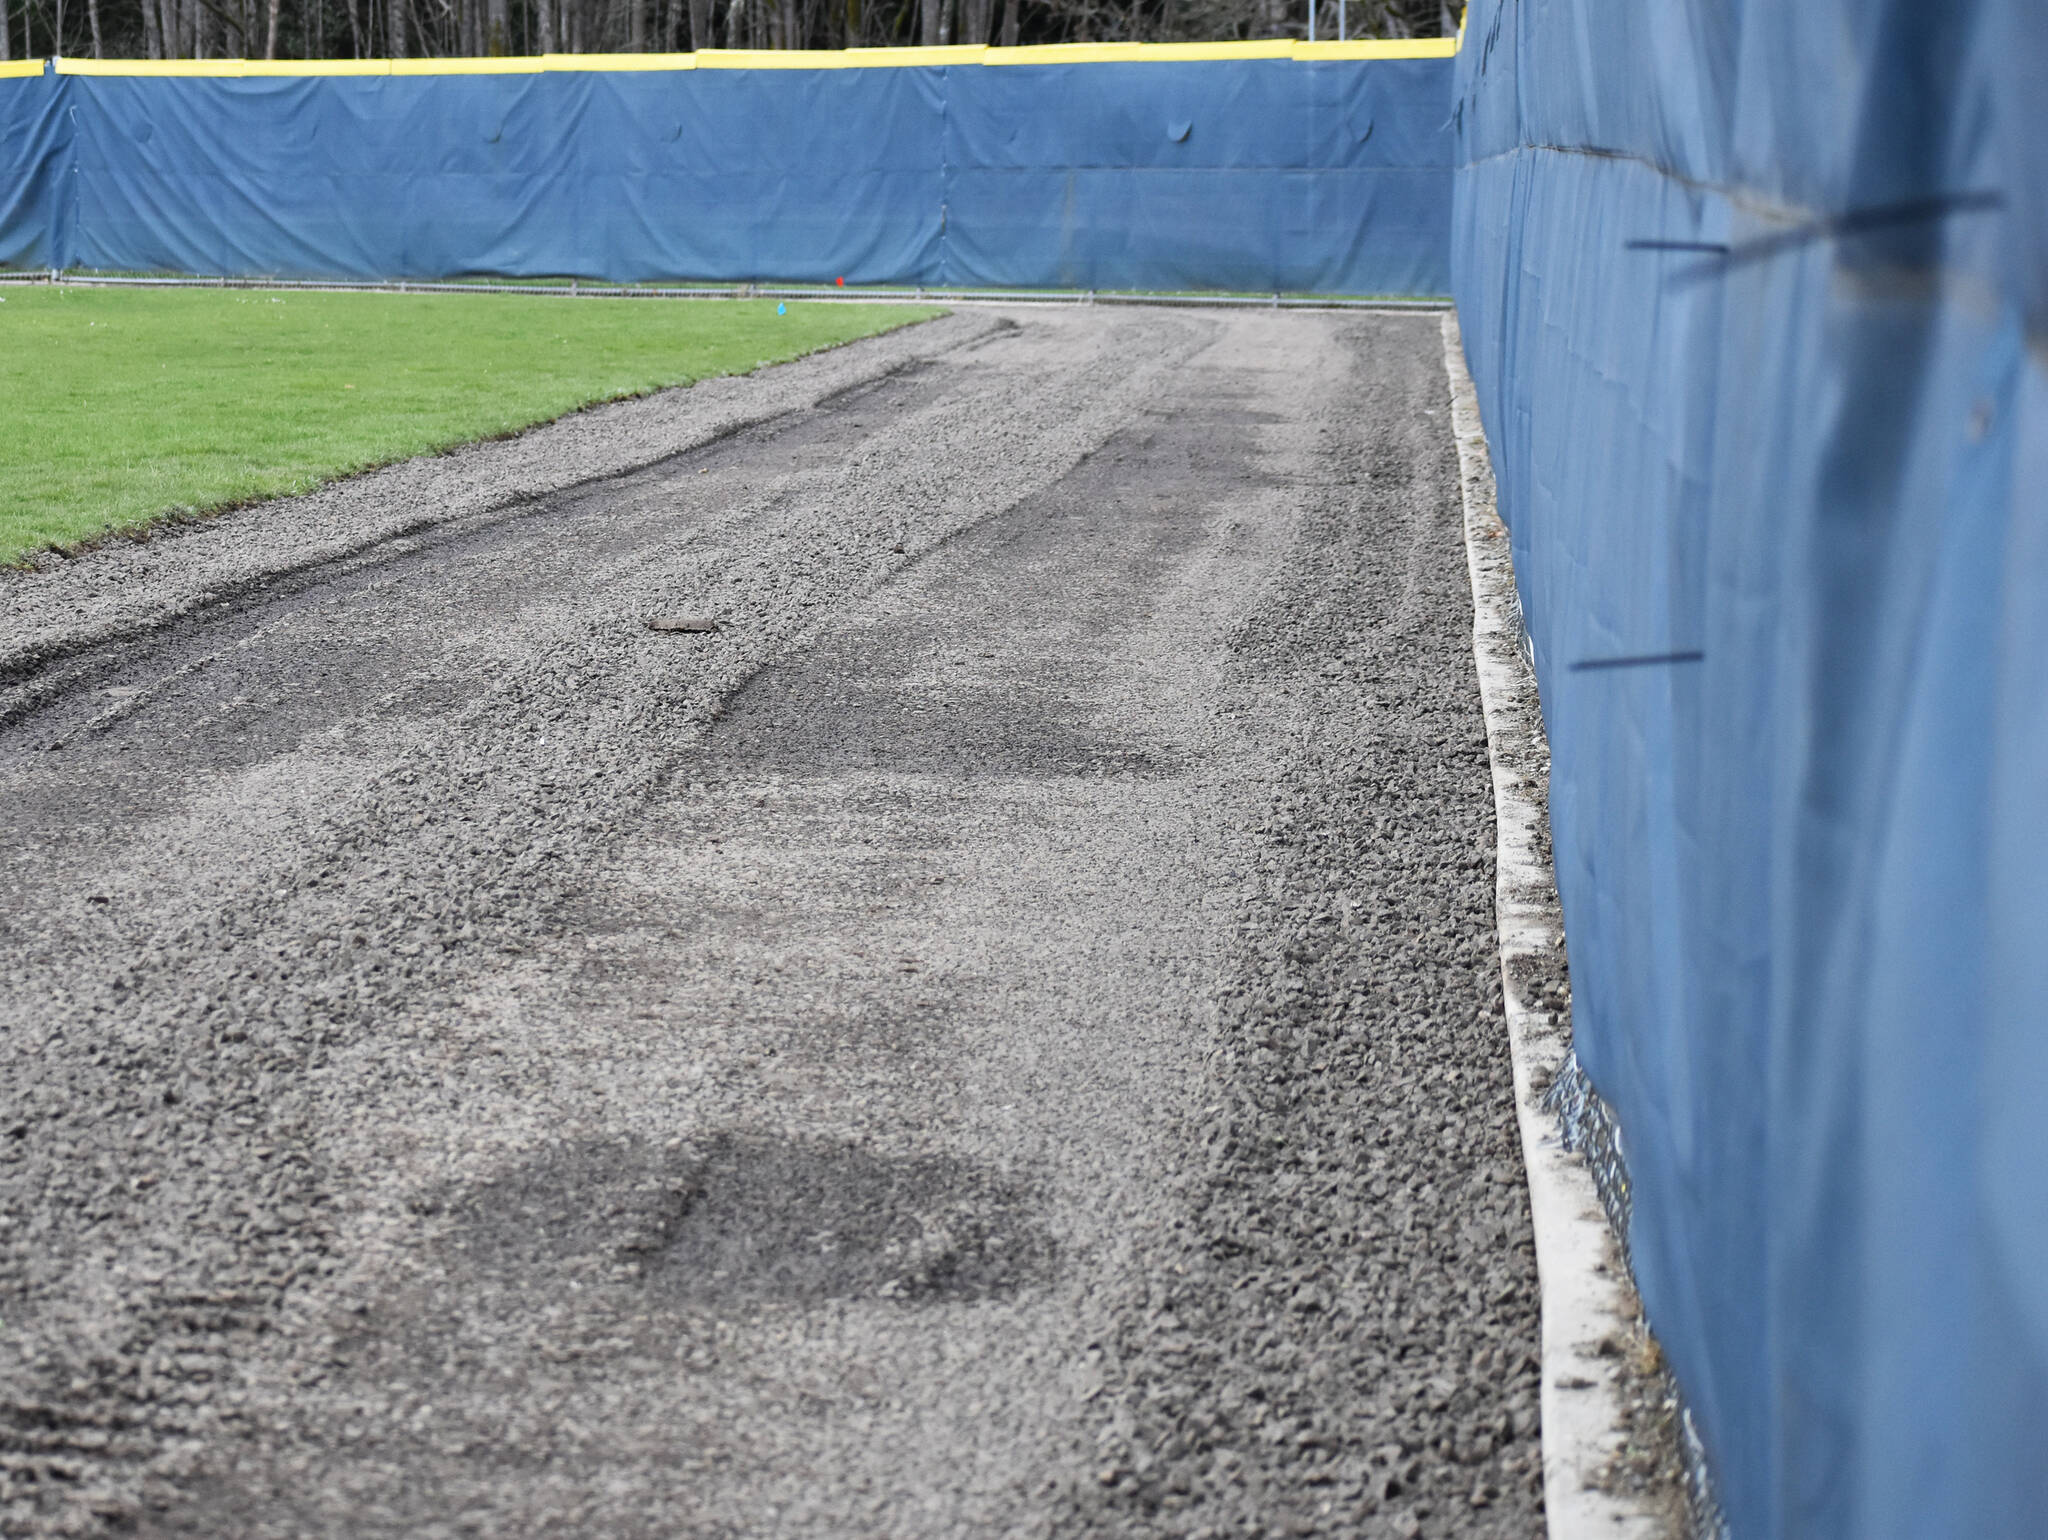 Bainbridge baseball is planning to add a rock warning track in the outfield.